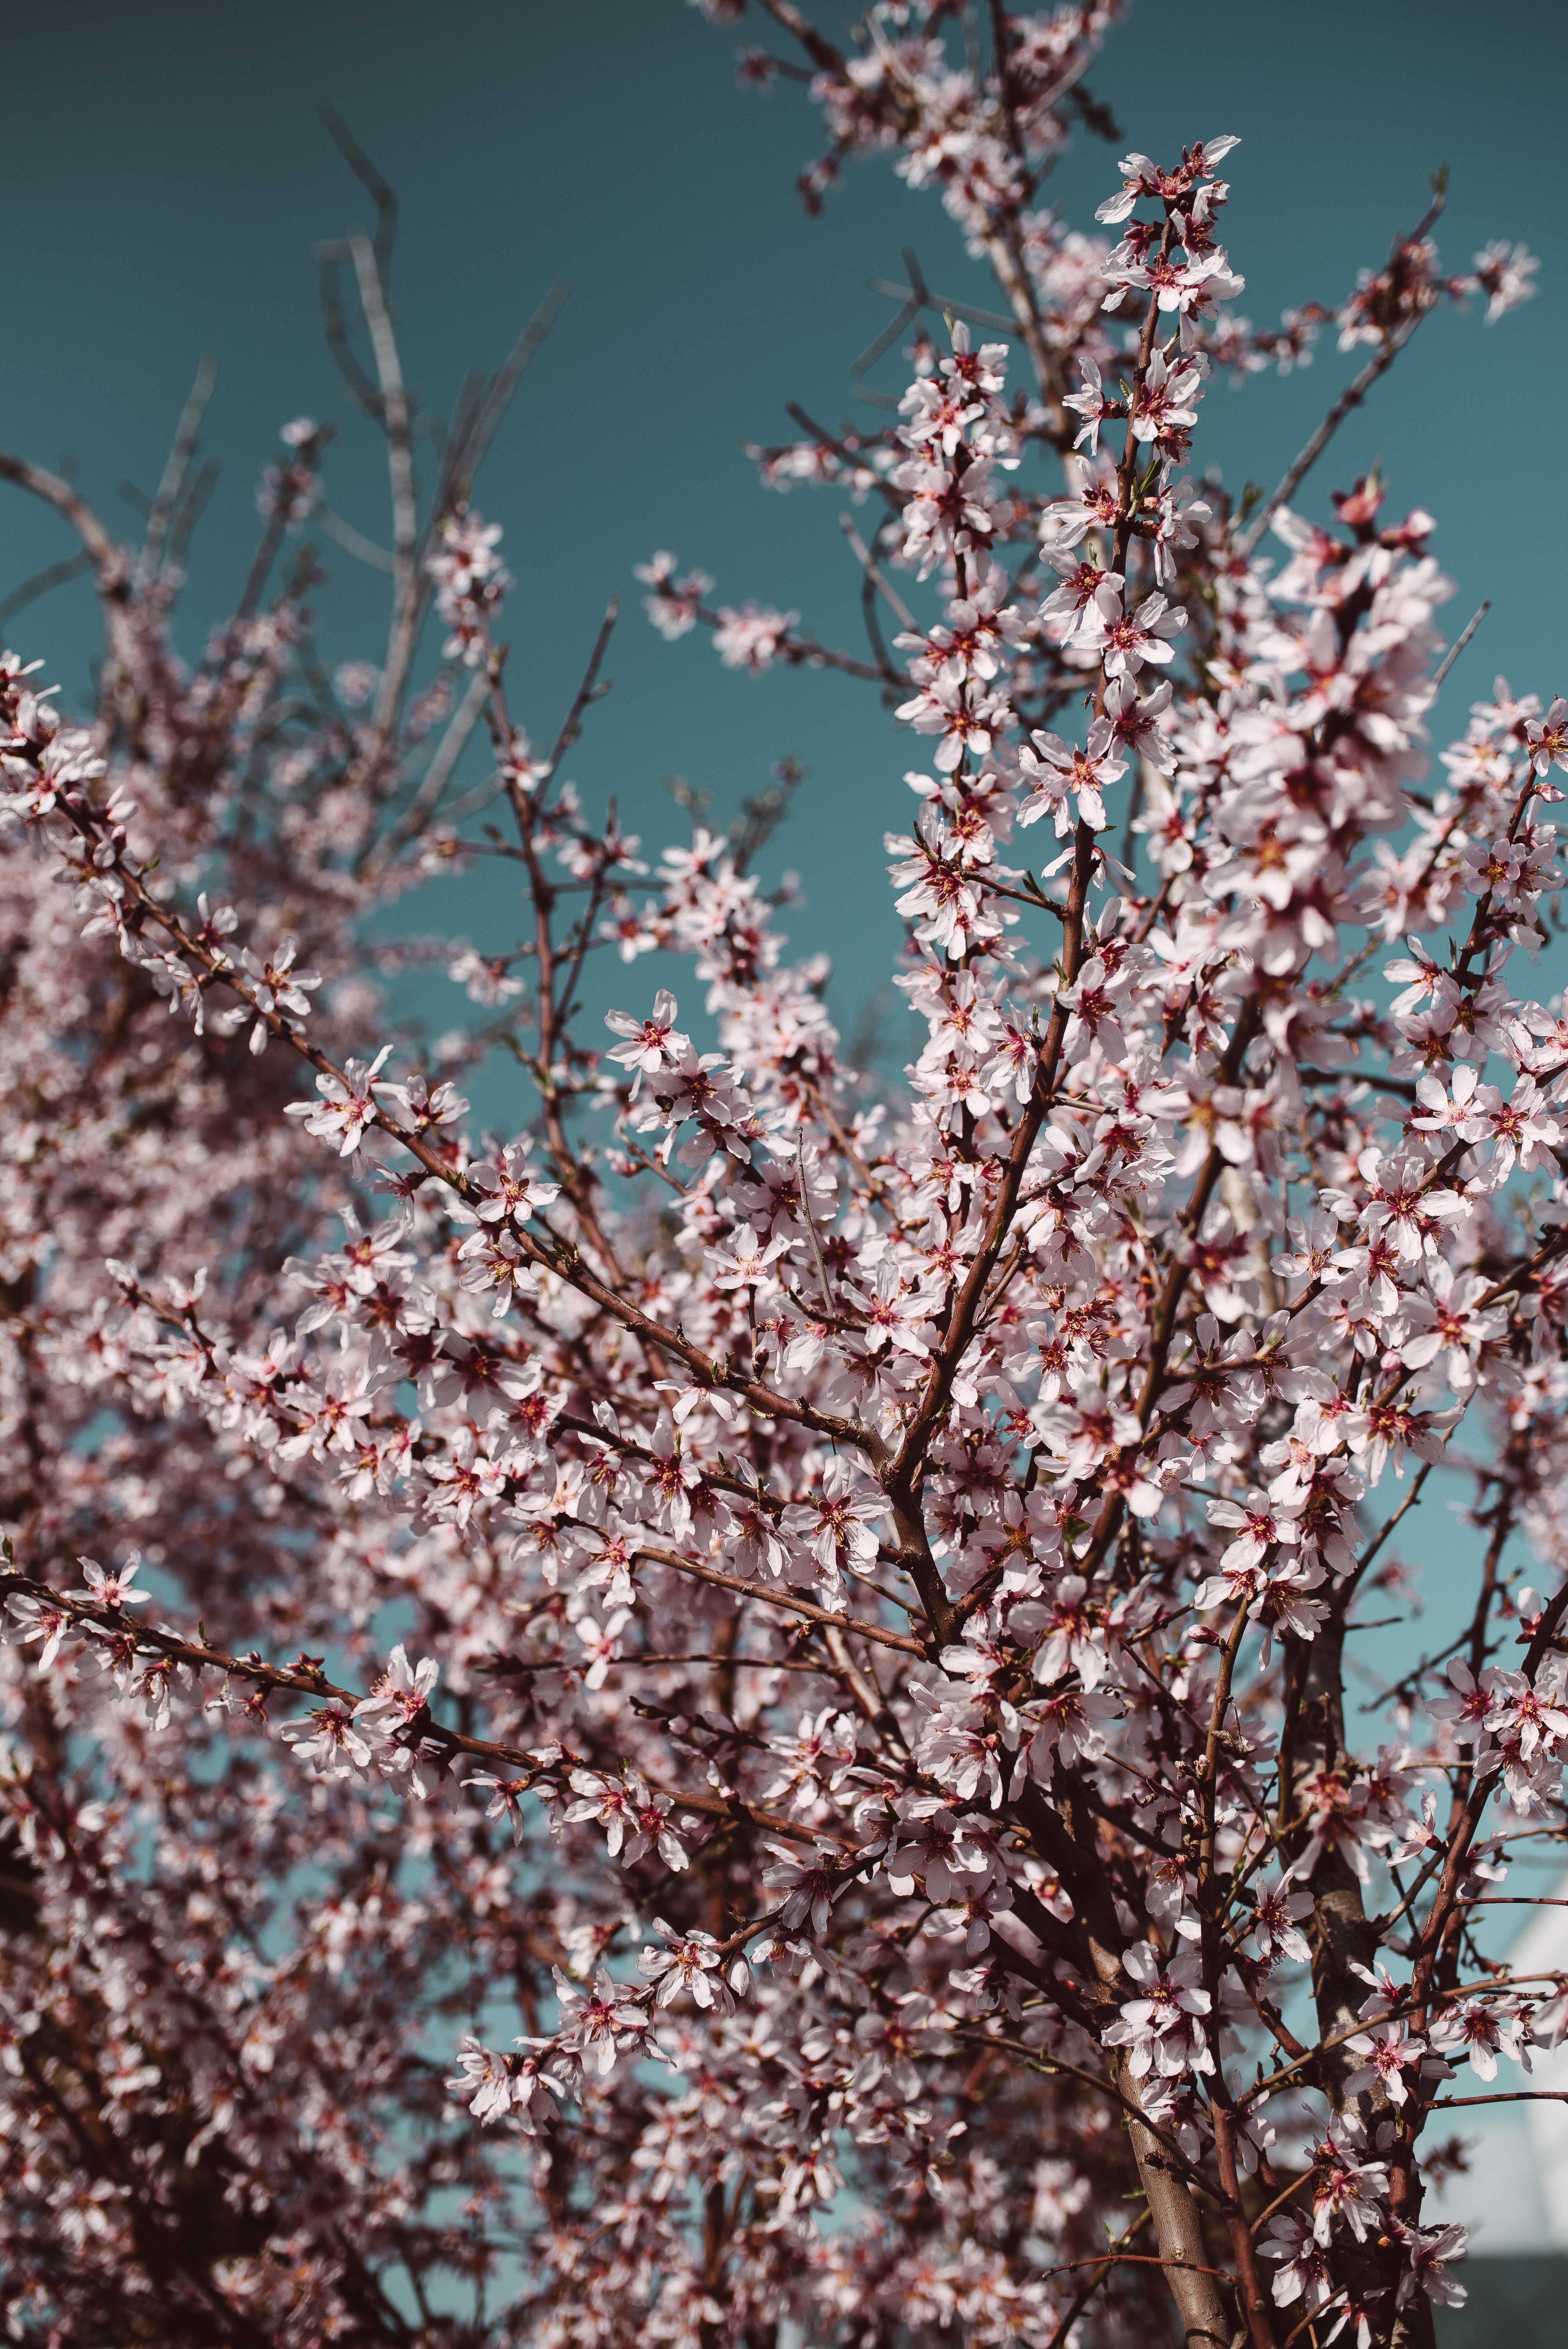 550 Cherry Blossom Pictures  Download Free Images on Unsplash